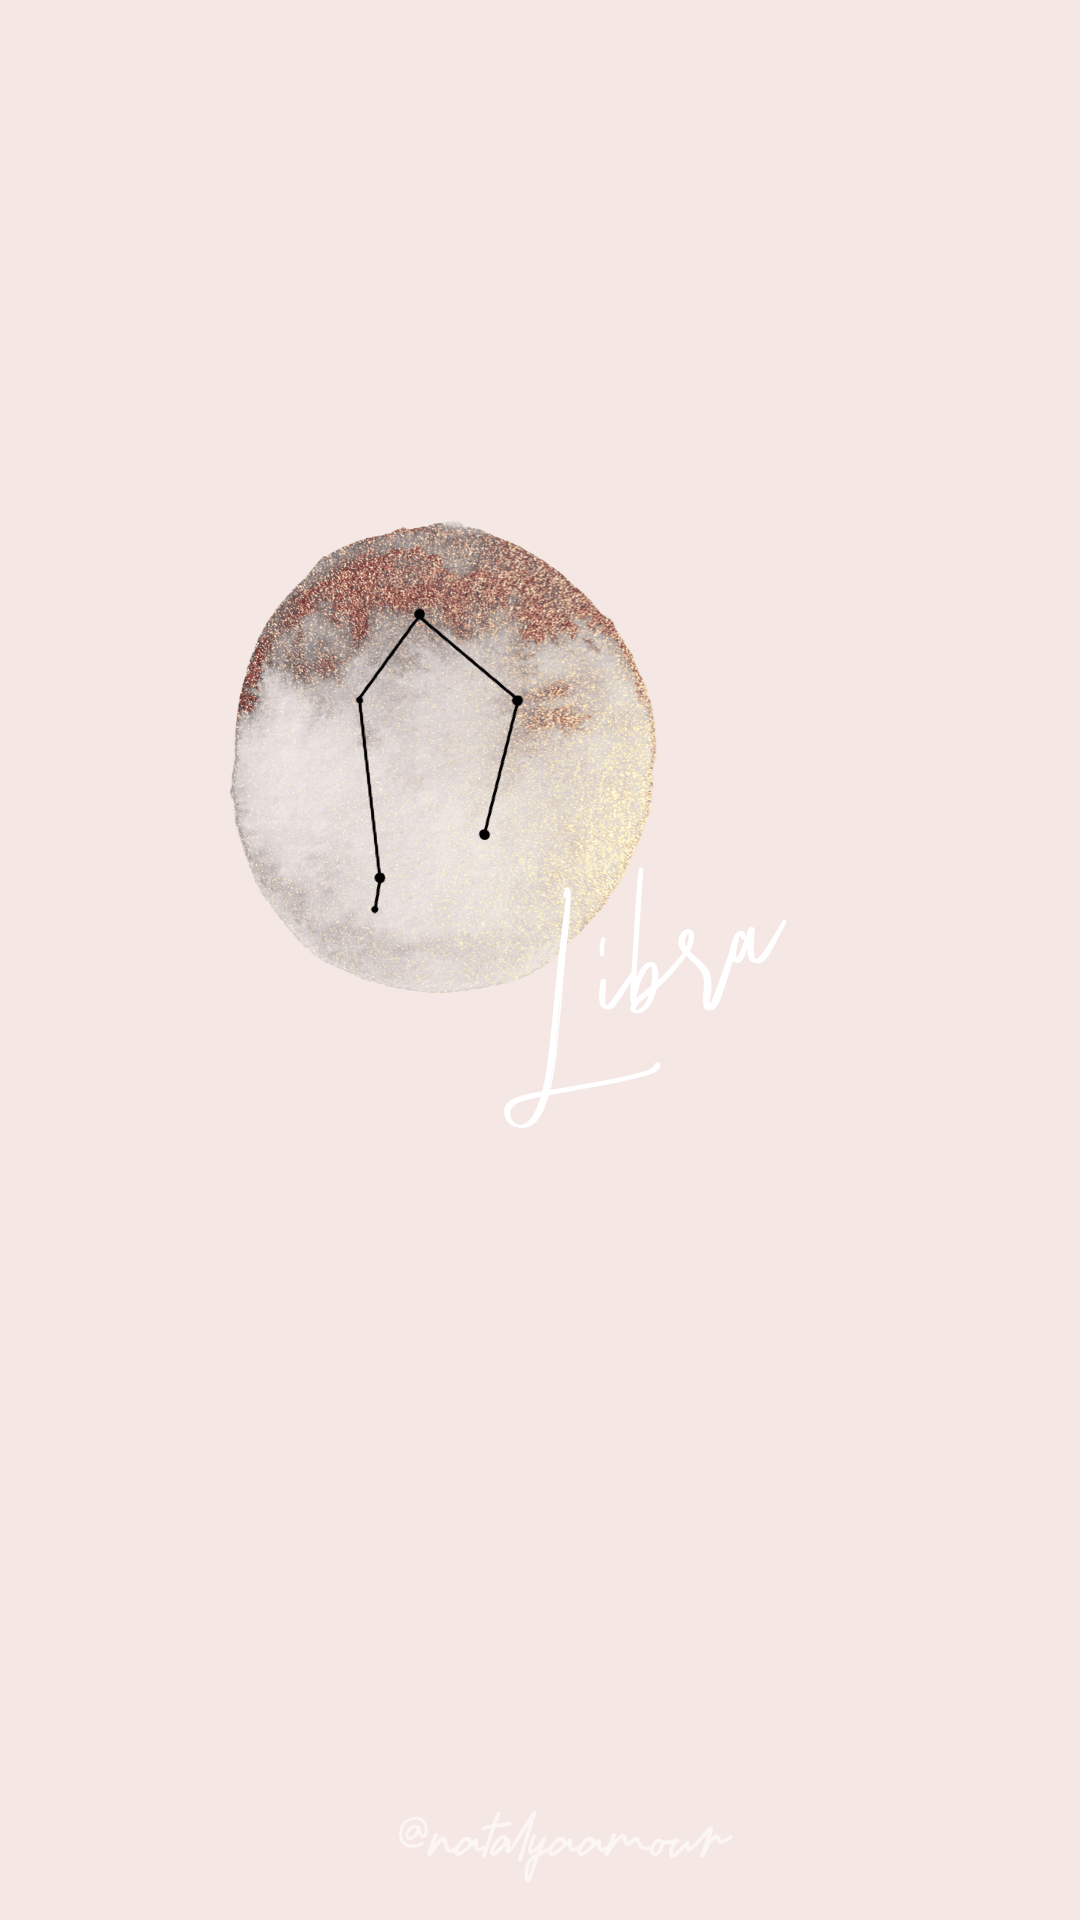 A pink and white poster with the zodiac sign of libra - Libra